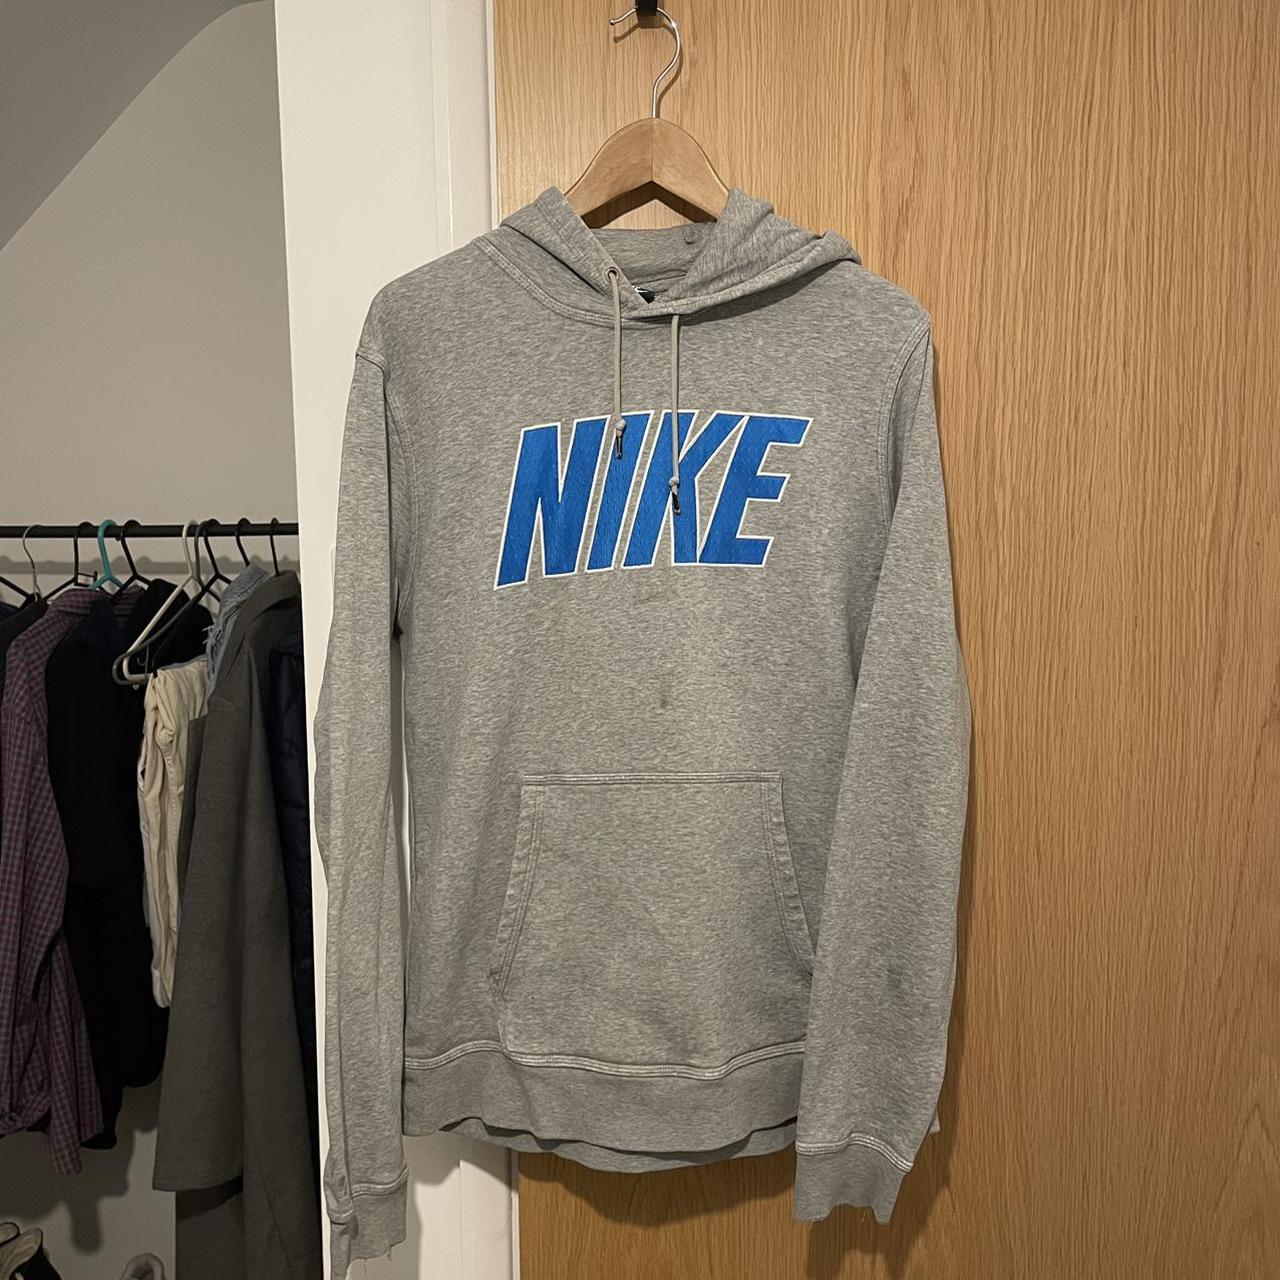 Product Image 1 - Nike Jumper!!

- in good condition
-size